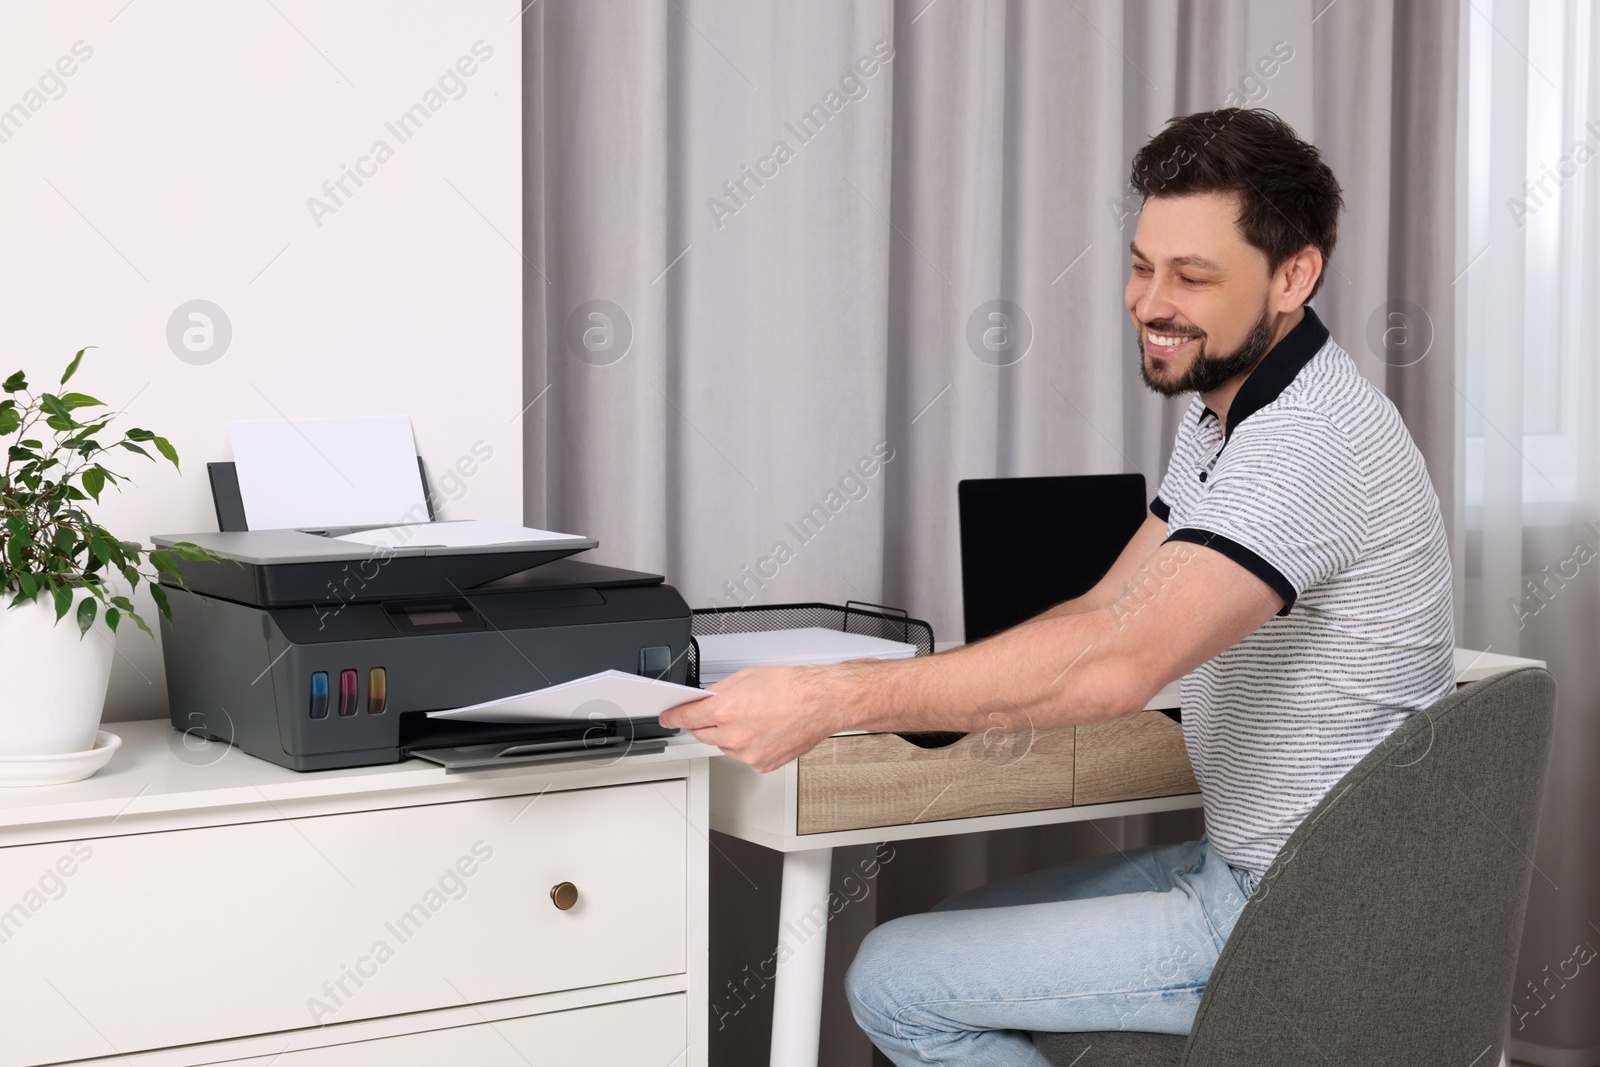 Photo of Man using modern printer at workplace indoors